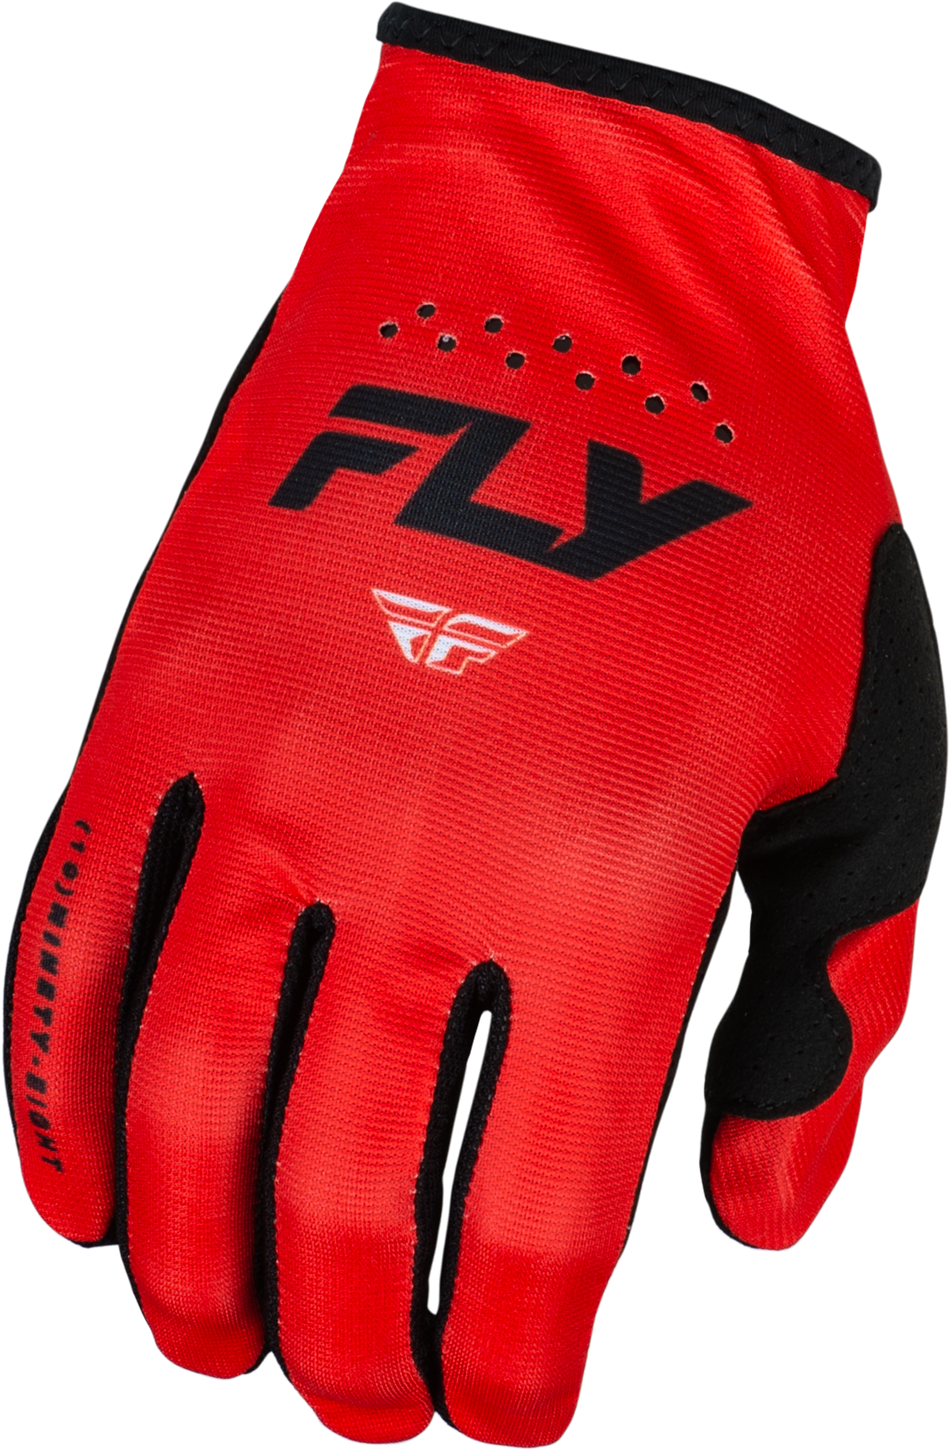 FLY RACING Youth Lite Gloves Red/Black Ym 377-712YM